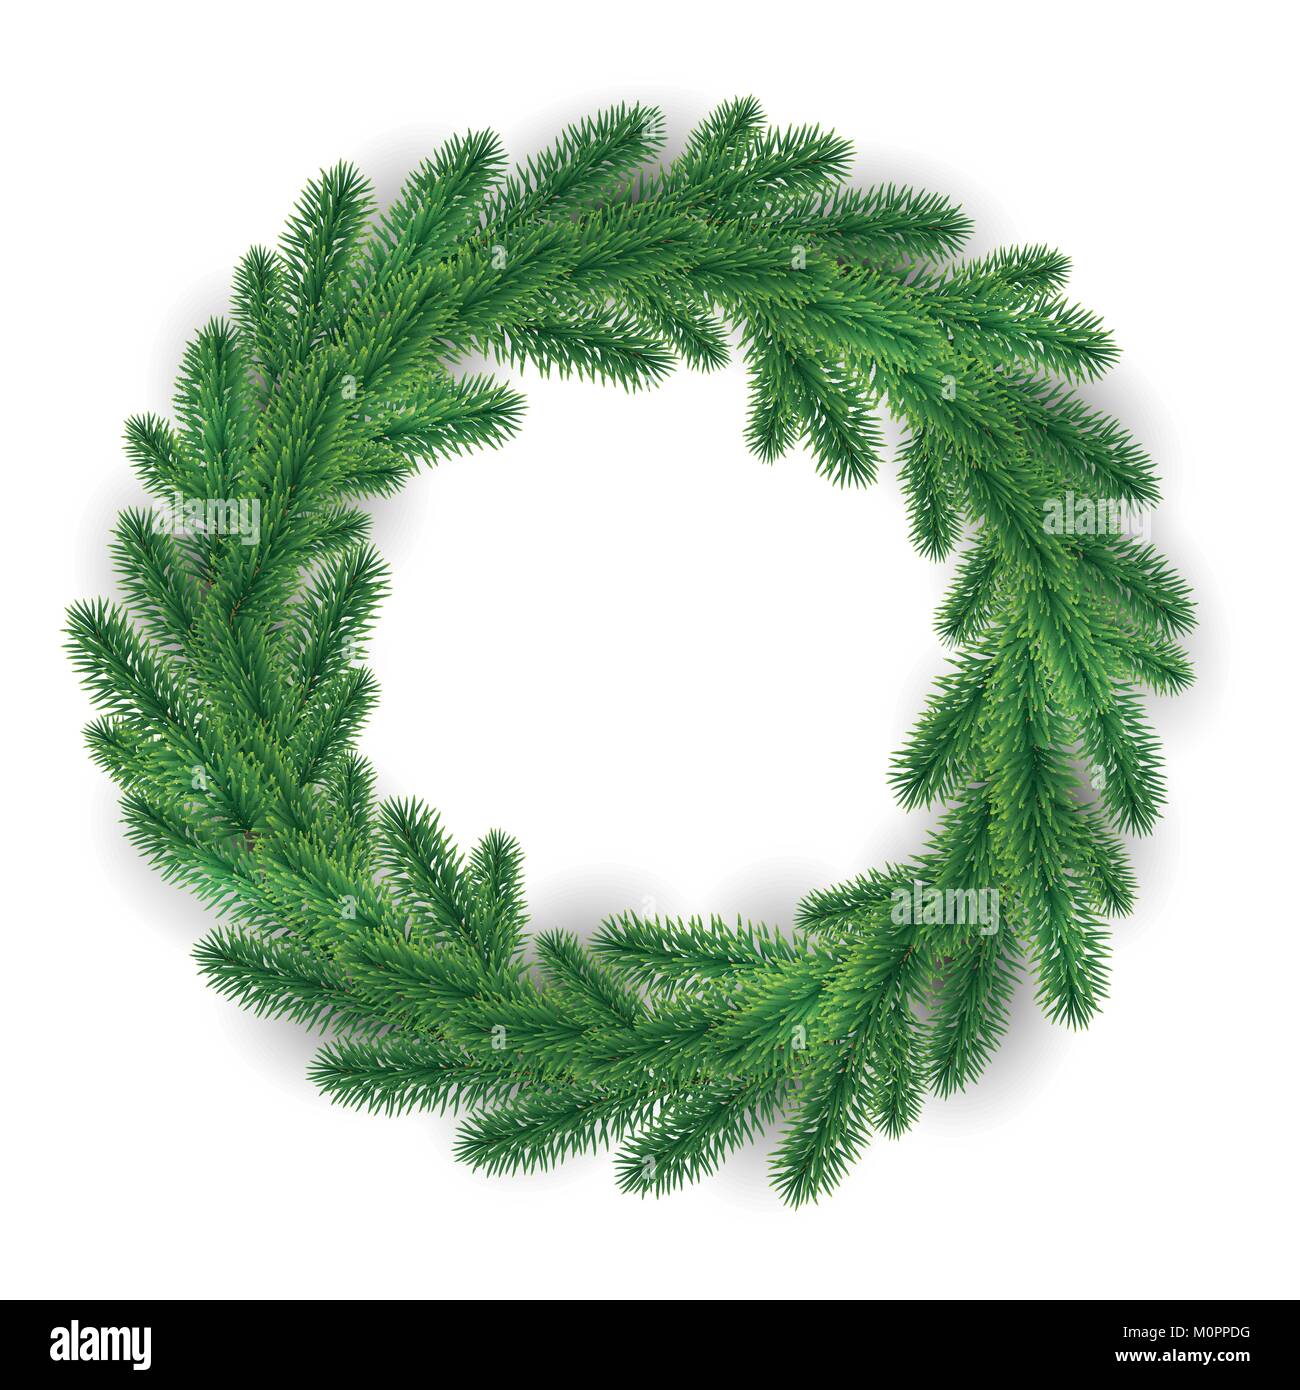 Green Christmas Wreath on white background. Vector image for new year s day, christmas, decoration, winter holiday. Stock Vector